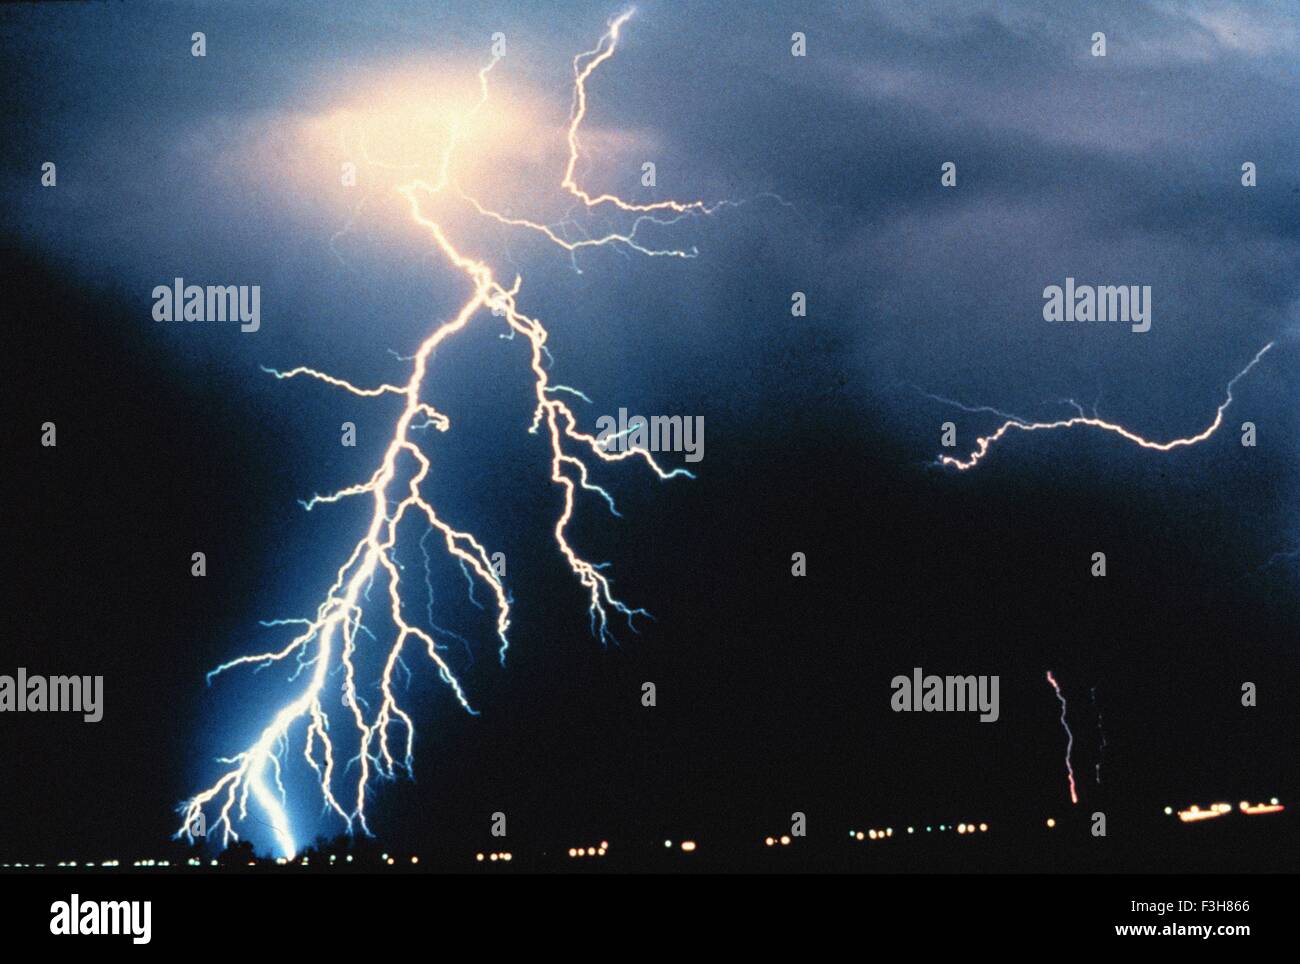 Lightning photograph from NOAA's National Severe Storms Laboratory (NSSL) Collection Stock Photo